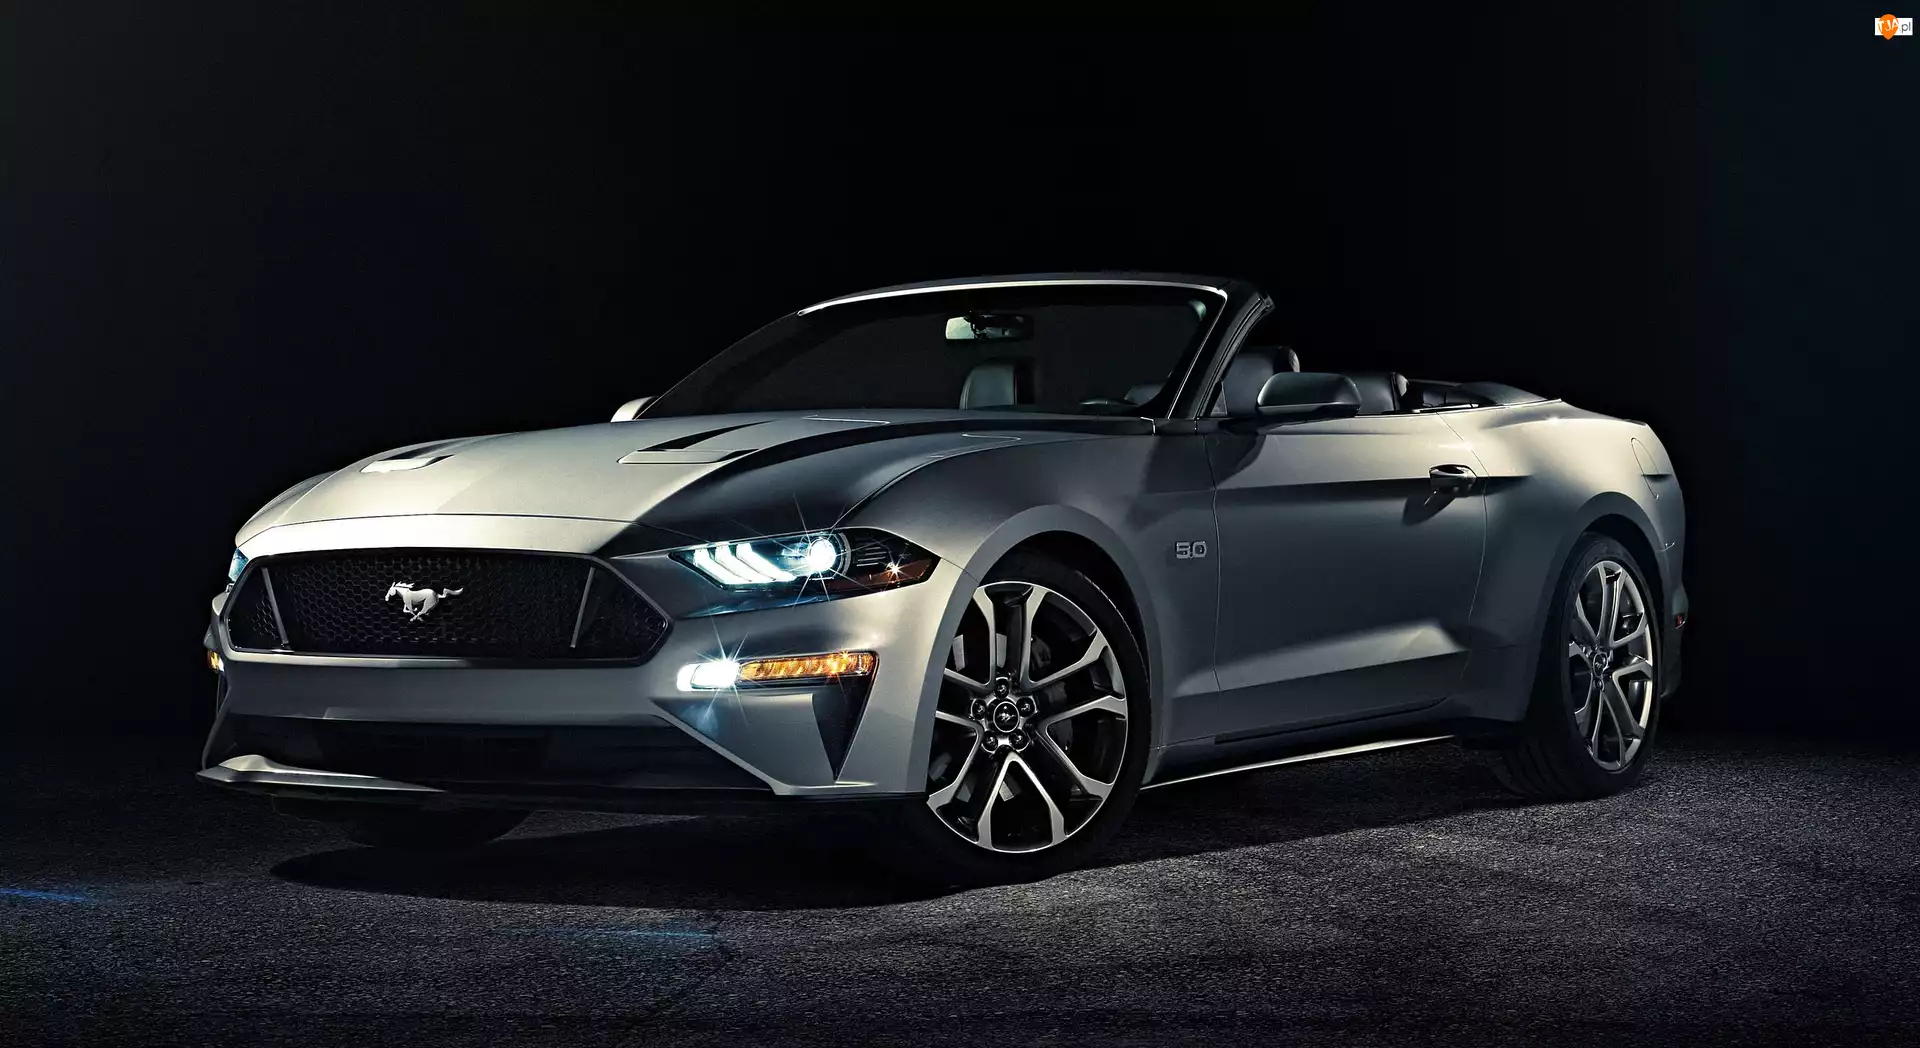 Ford Mustang Convertible, 2018